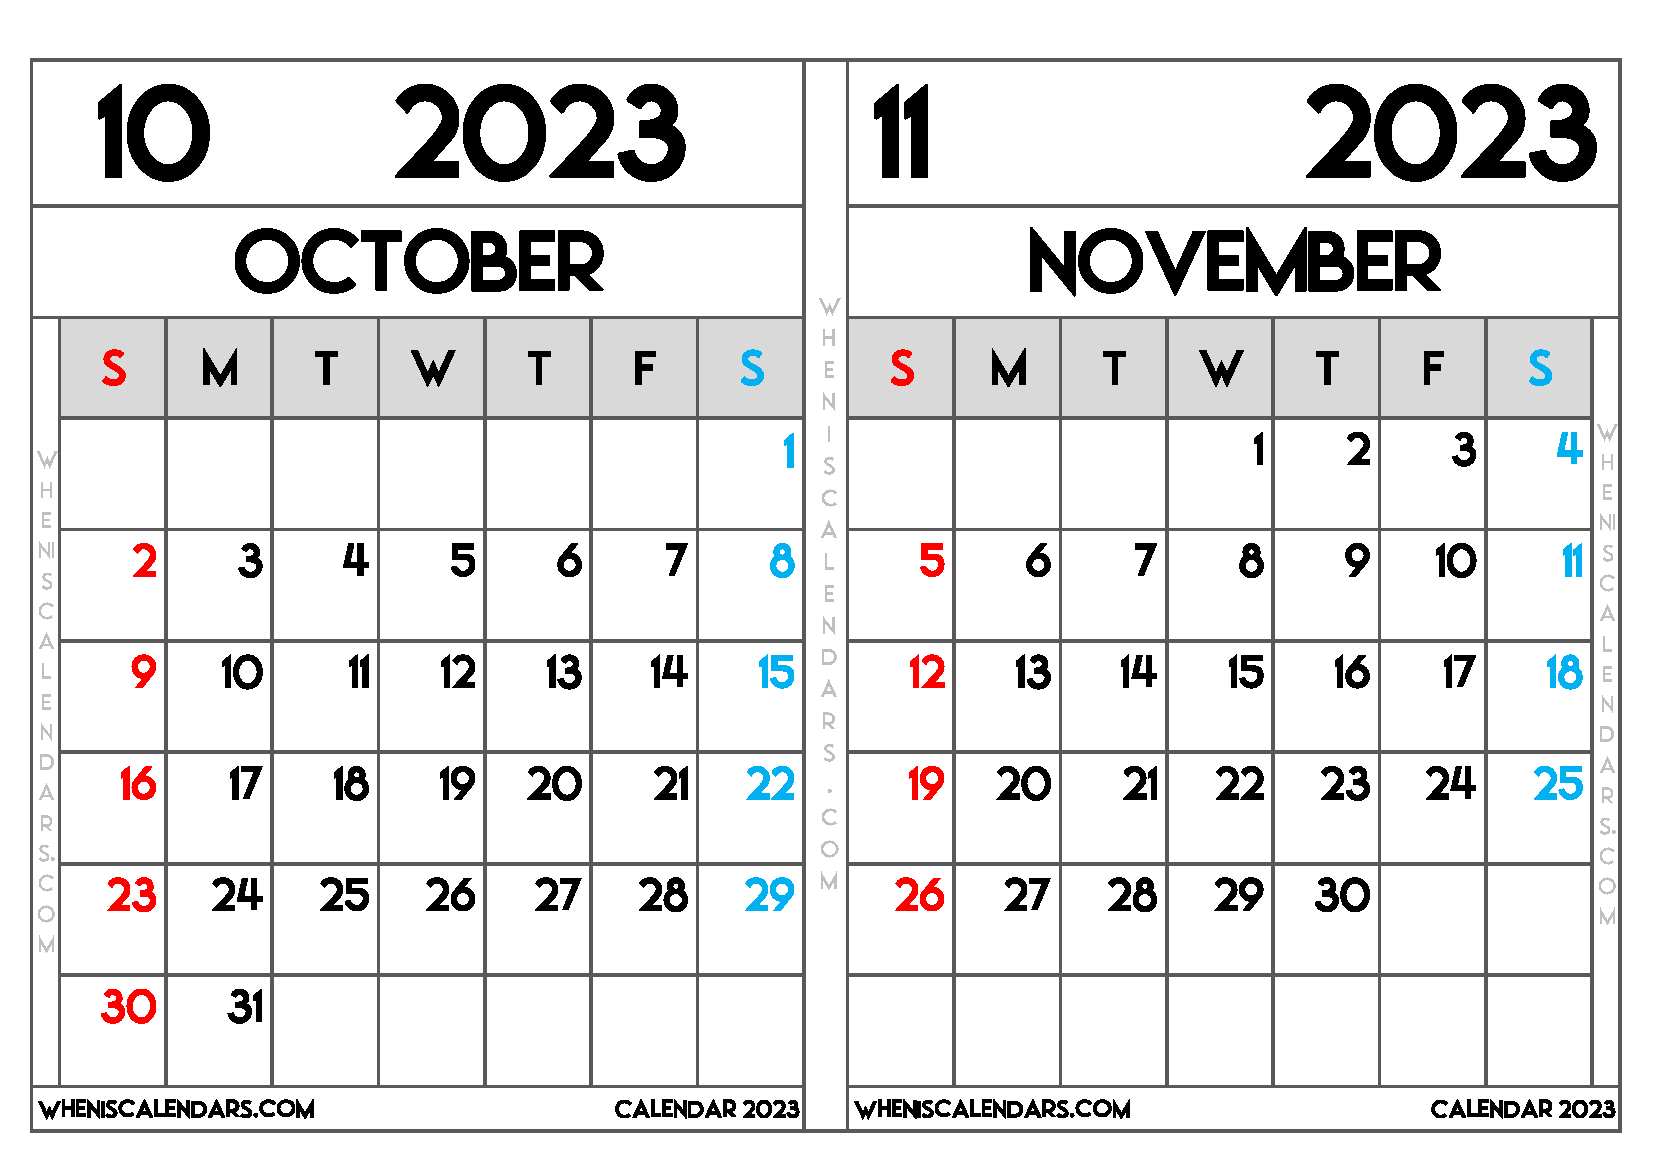 Download Free October November 2023 Calendar Printable Two Month Per Page as PDF and PNG Image